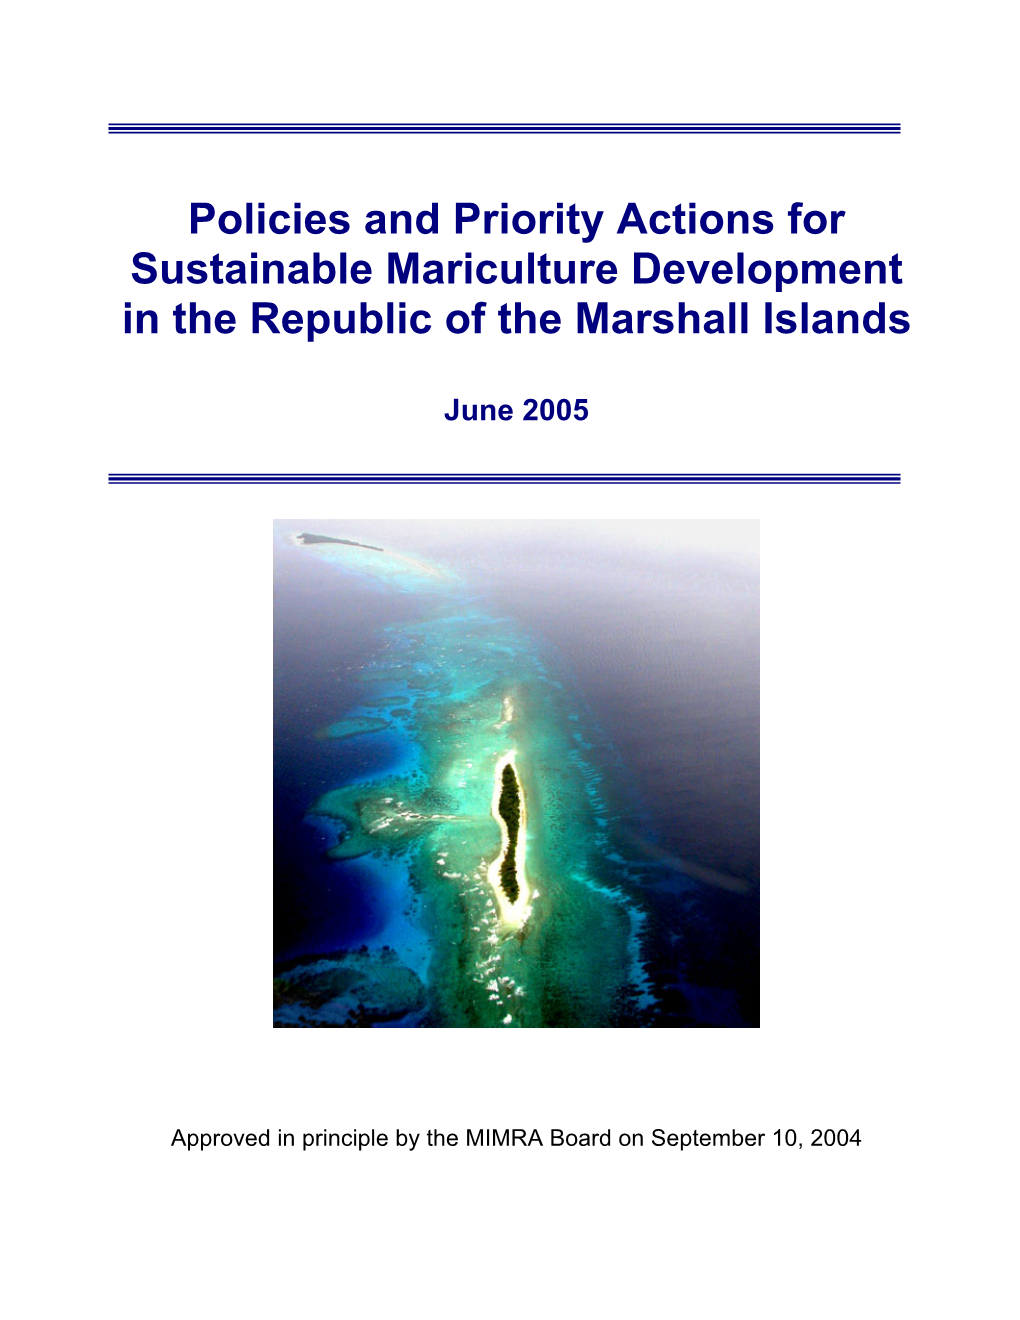 Policies and Priority Actions for Sustainable Mariculture Development in the Republic of the Marshall Islands